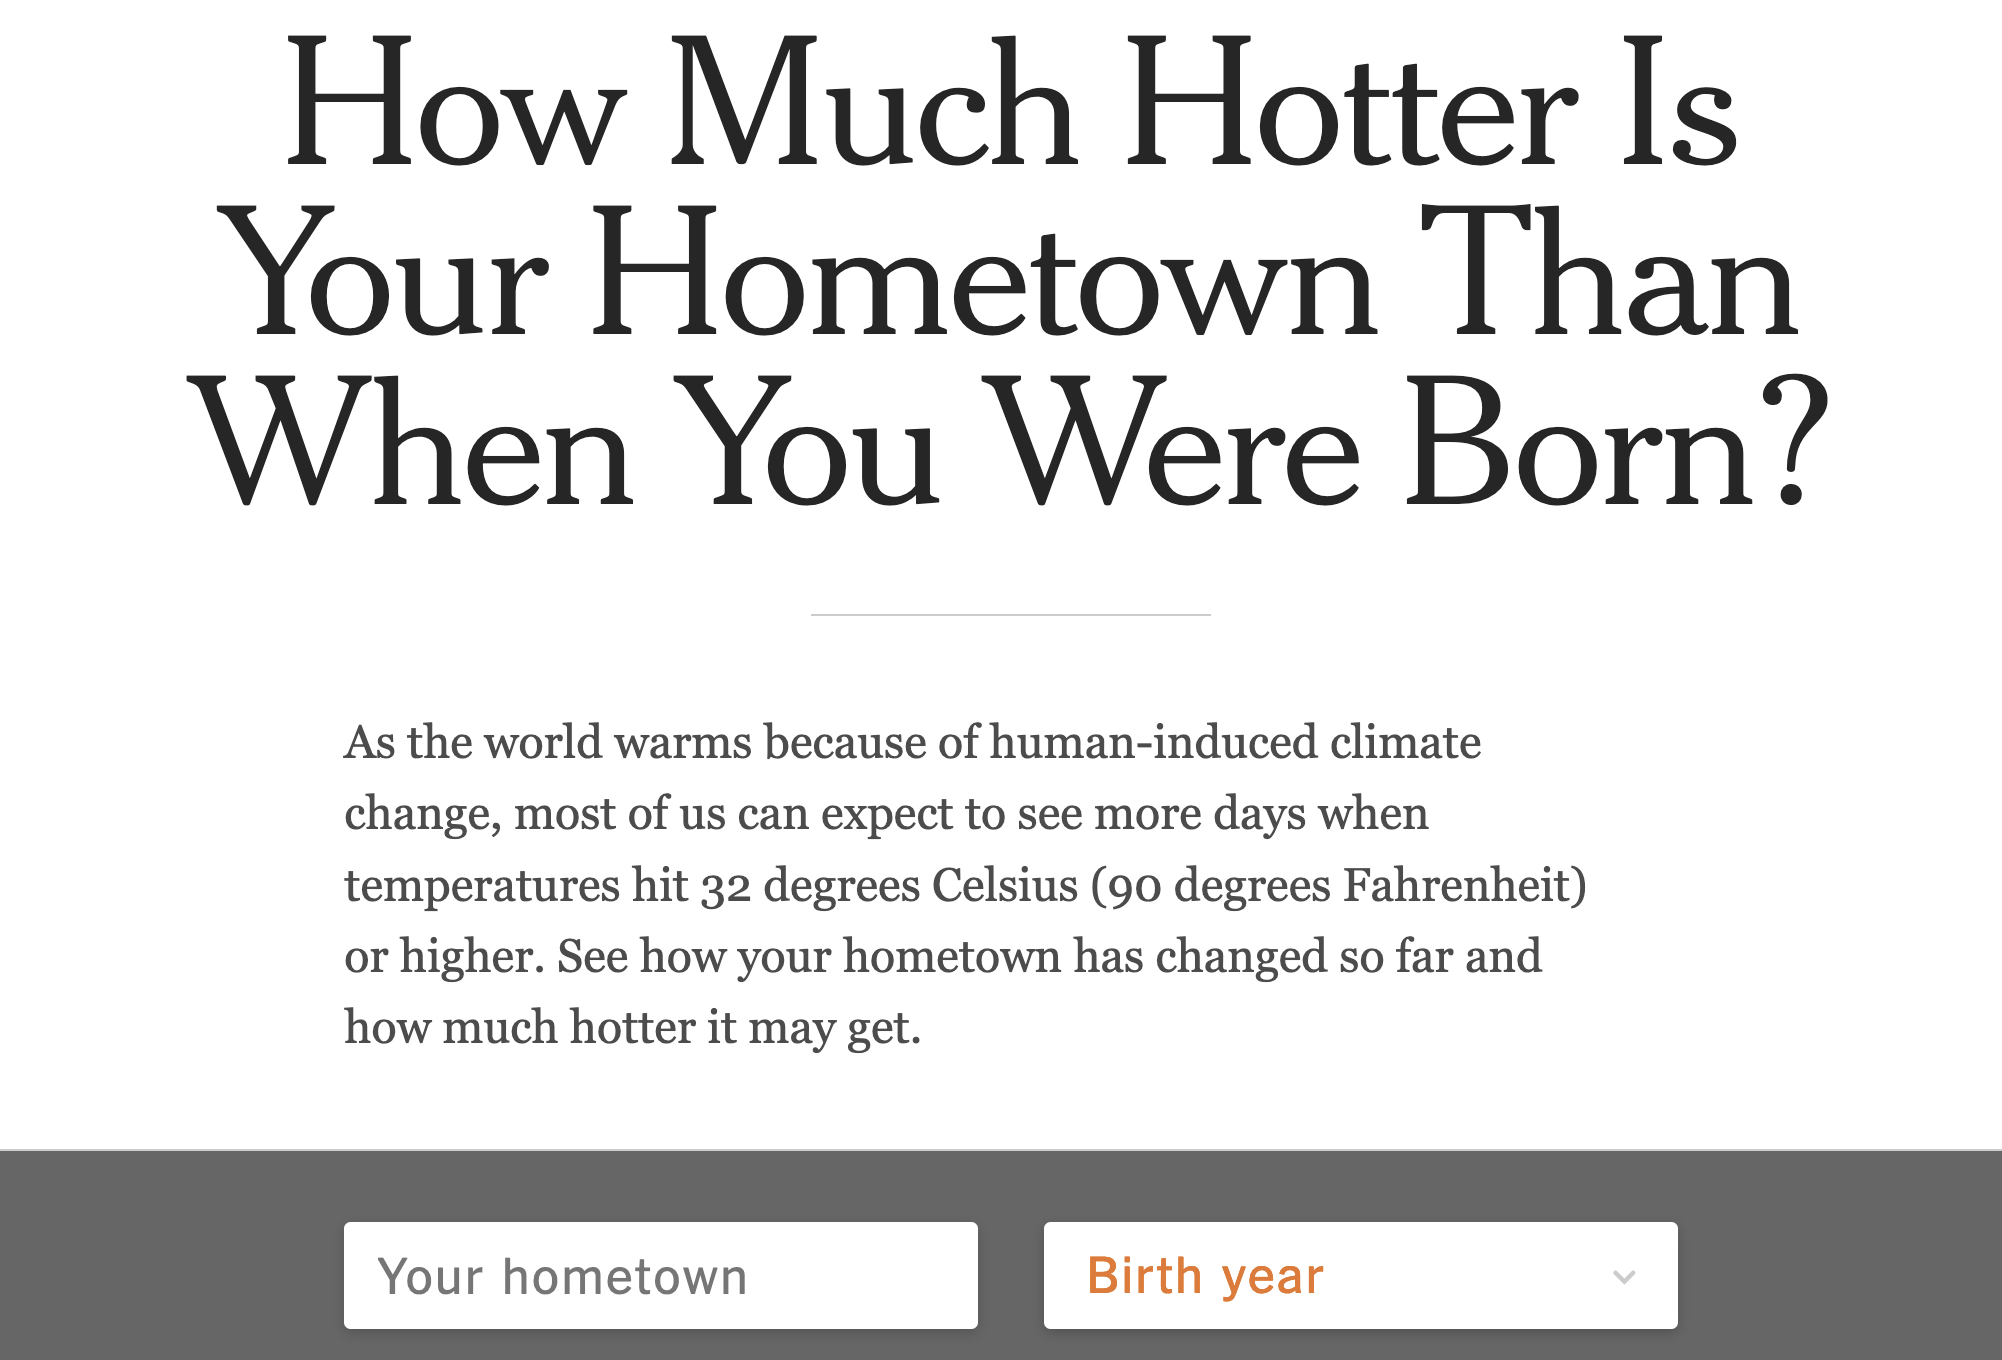 Screenshot of the interface of the 'How Much Hotter Is Your Hometown Than When You Were Born?' article. The interface has an input for looking up your hometown and an input for selecting your birth year.